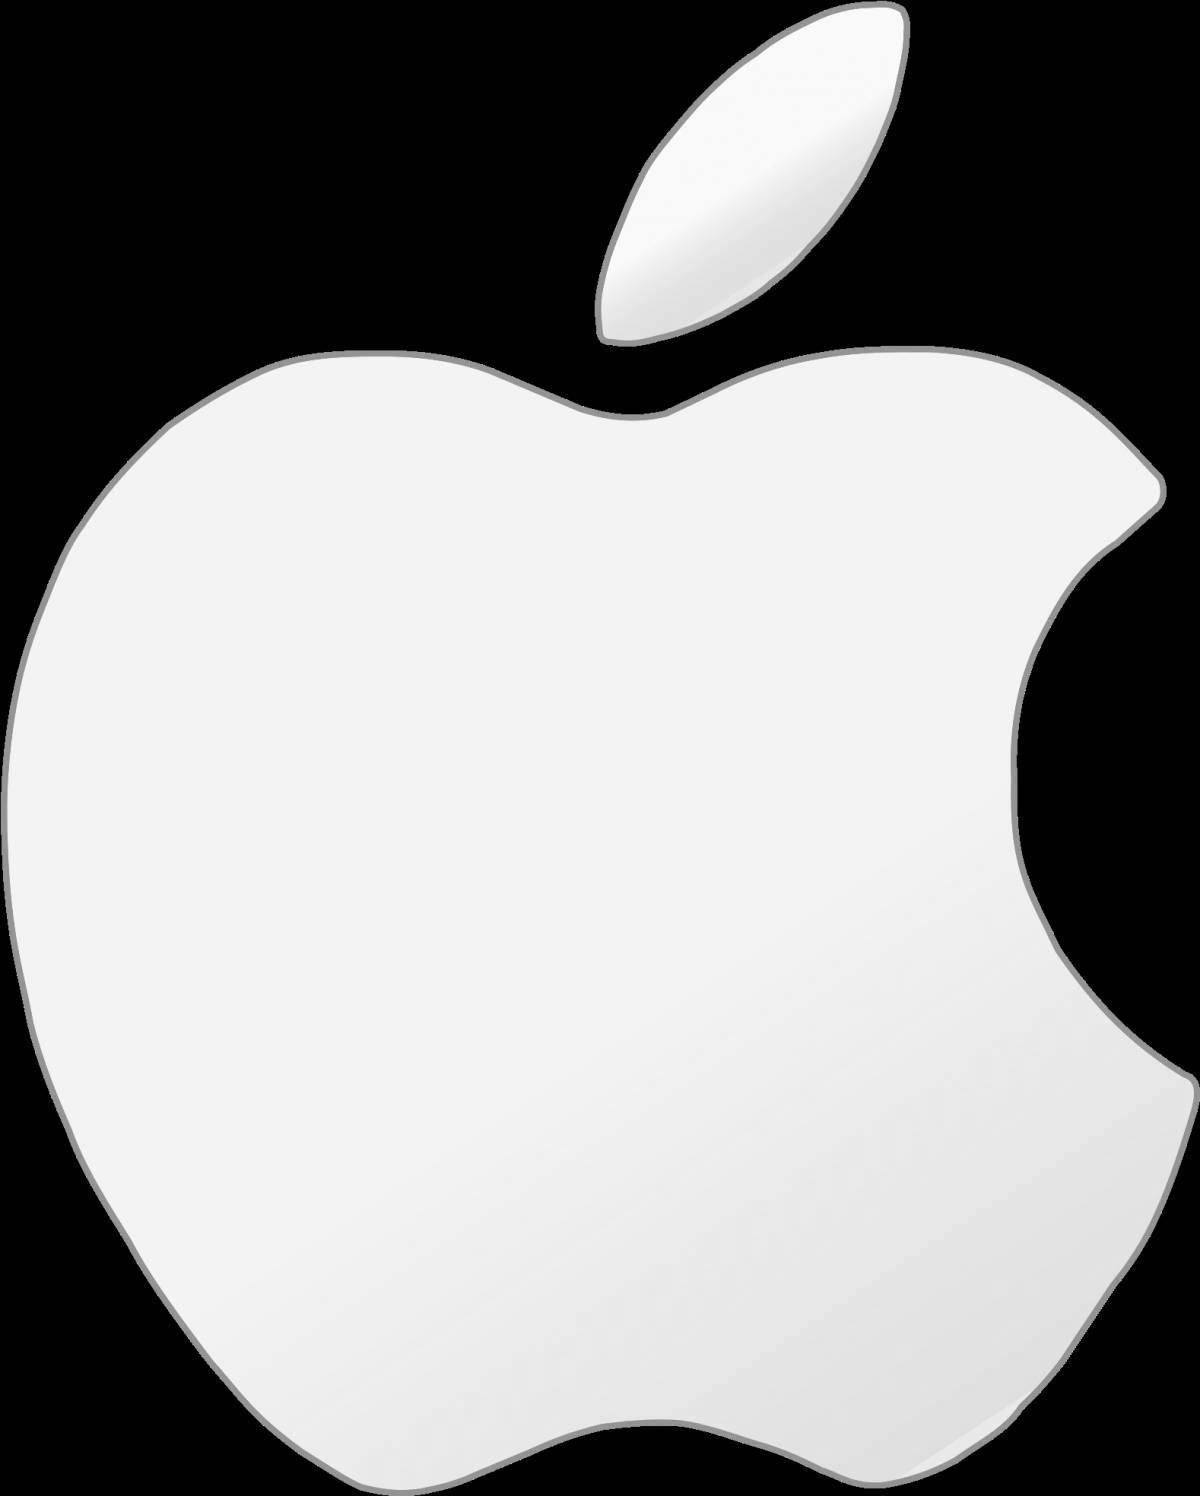 Charming apple icon coloring page